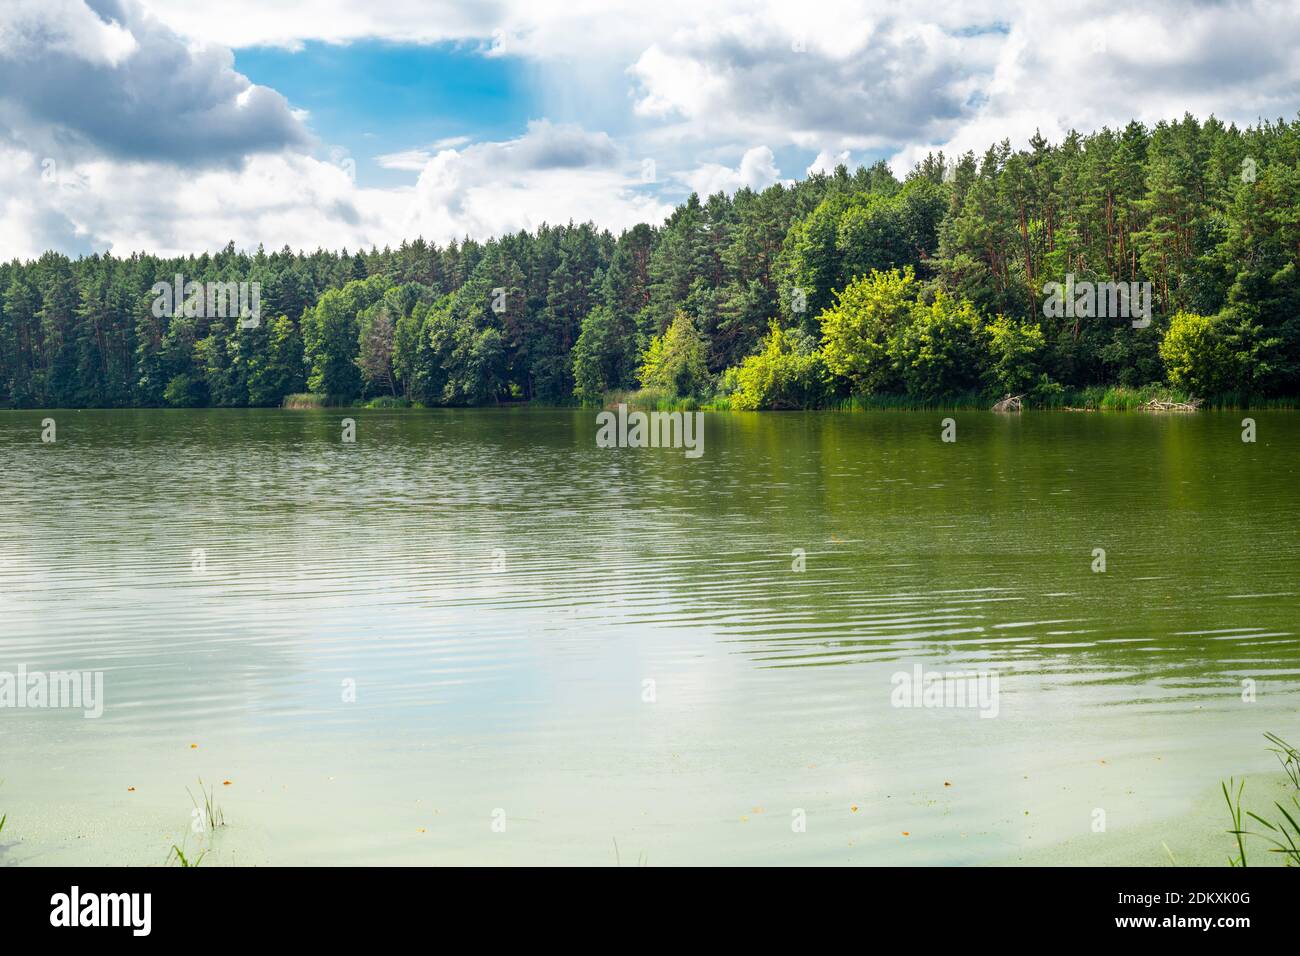 Beautiful natural scenery of river in forest. Landscape with green woods and river. Wonderful summertime scene of forest and blue green water among fo Stock Photo